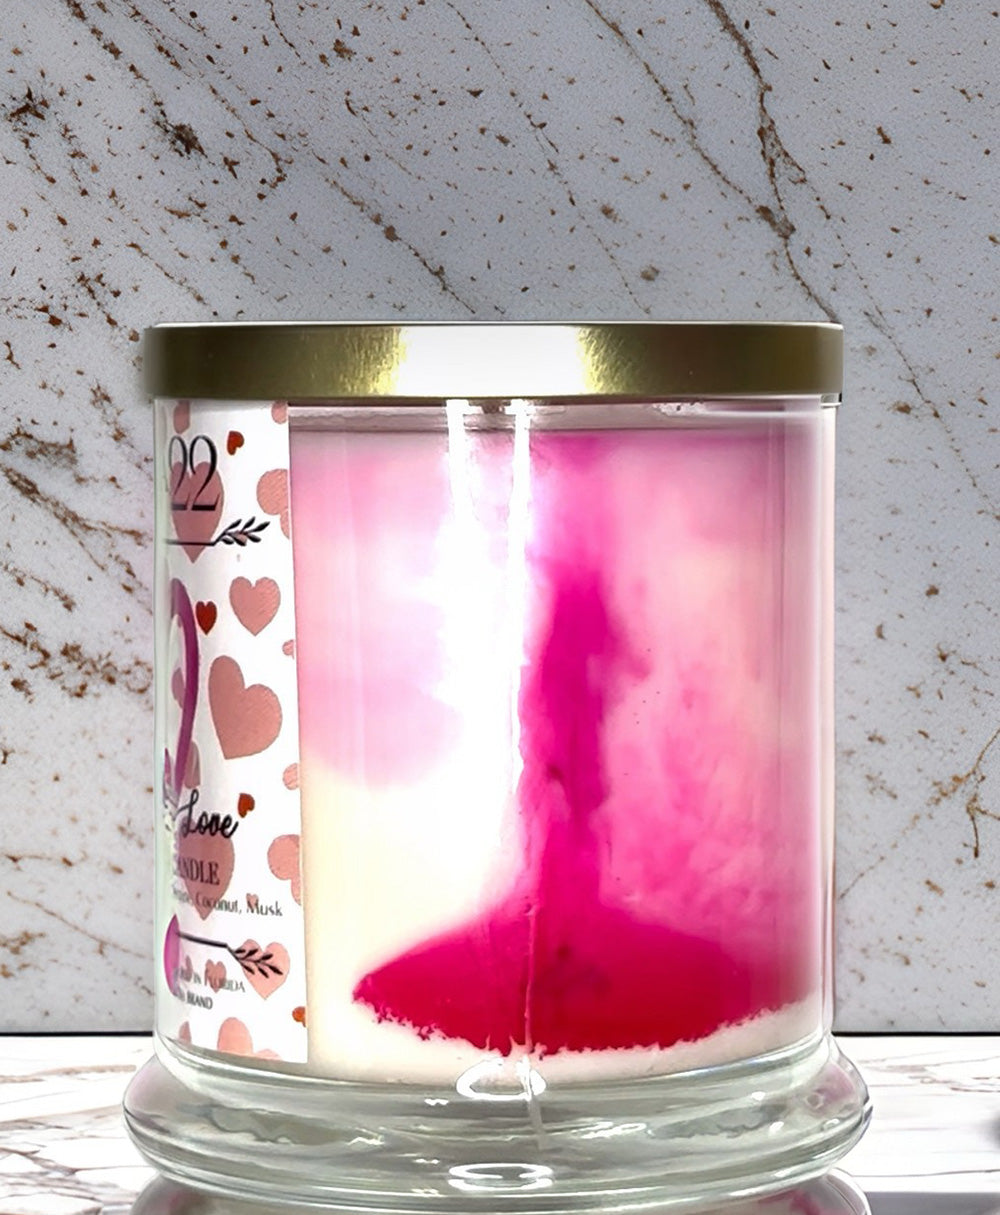 ETERNAL LOVE | Luxe Soy Candle